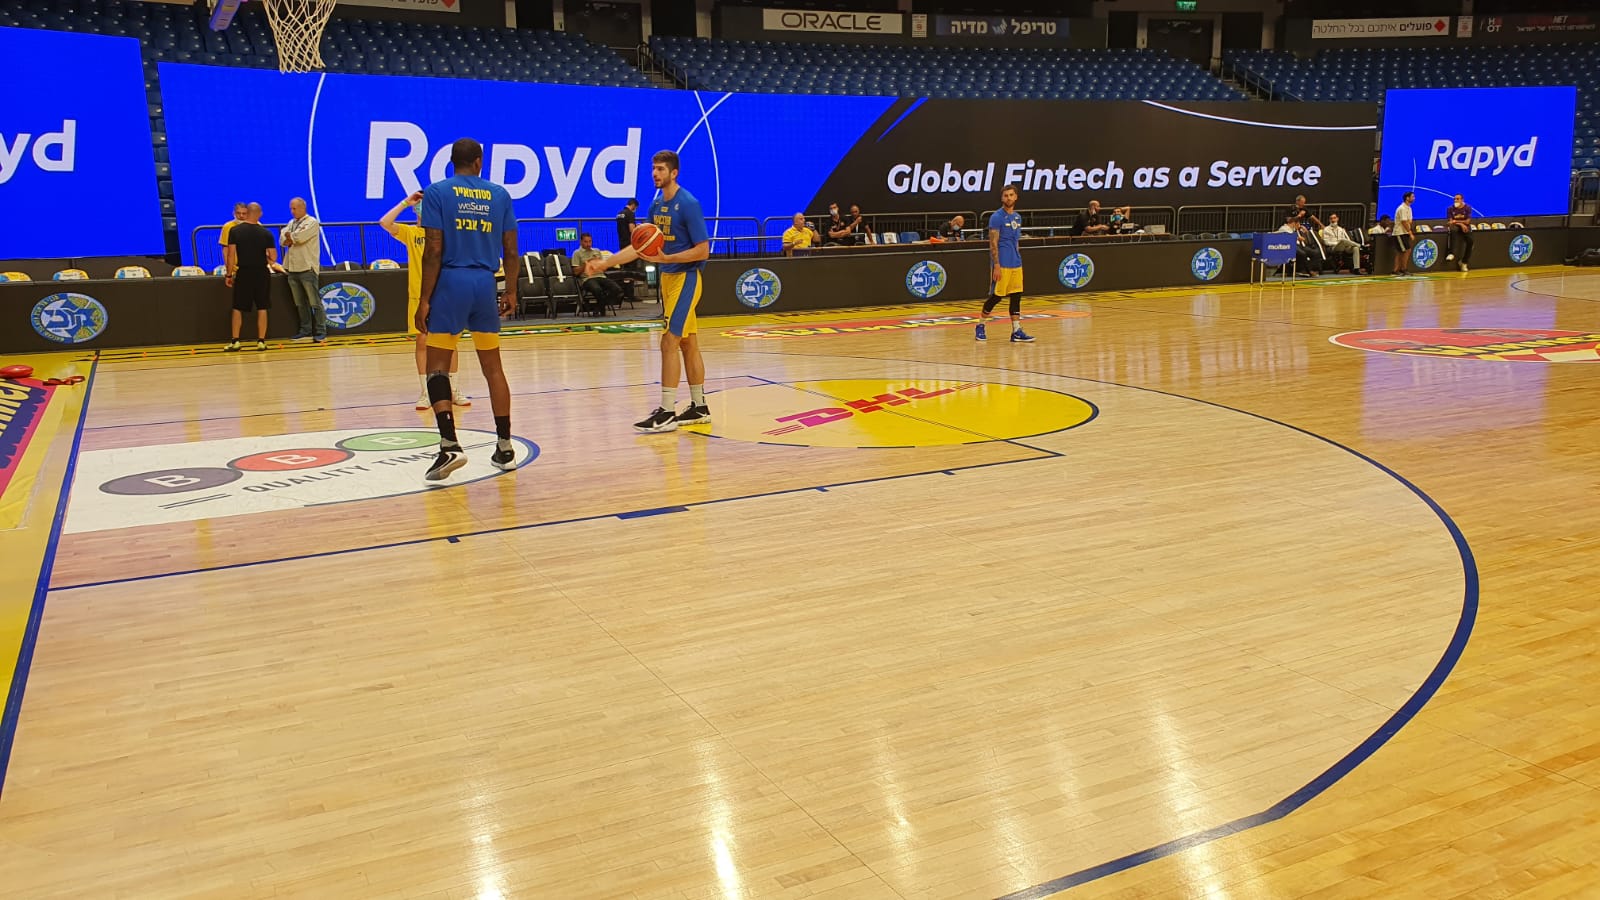 Rapyd featured on large screen at Maccabi FOX Tel Aviv game